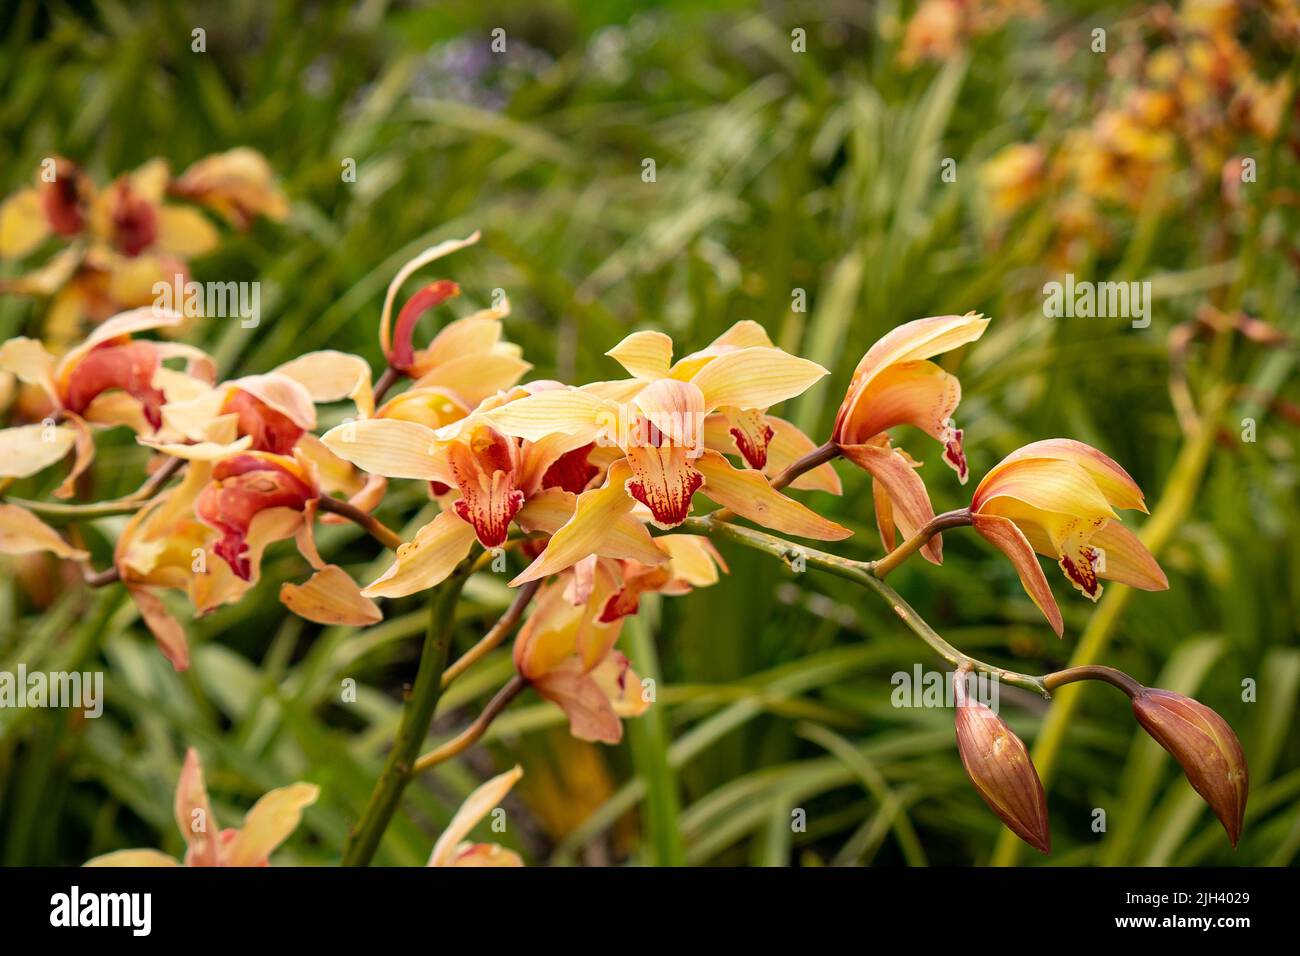 Yellow Flowers with Orange and Red (Cymbidium sinense) Moving in the Wind in the Garden Stock Photo